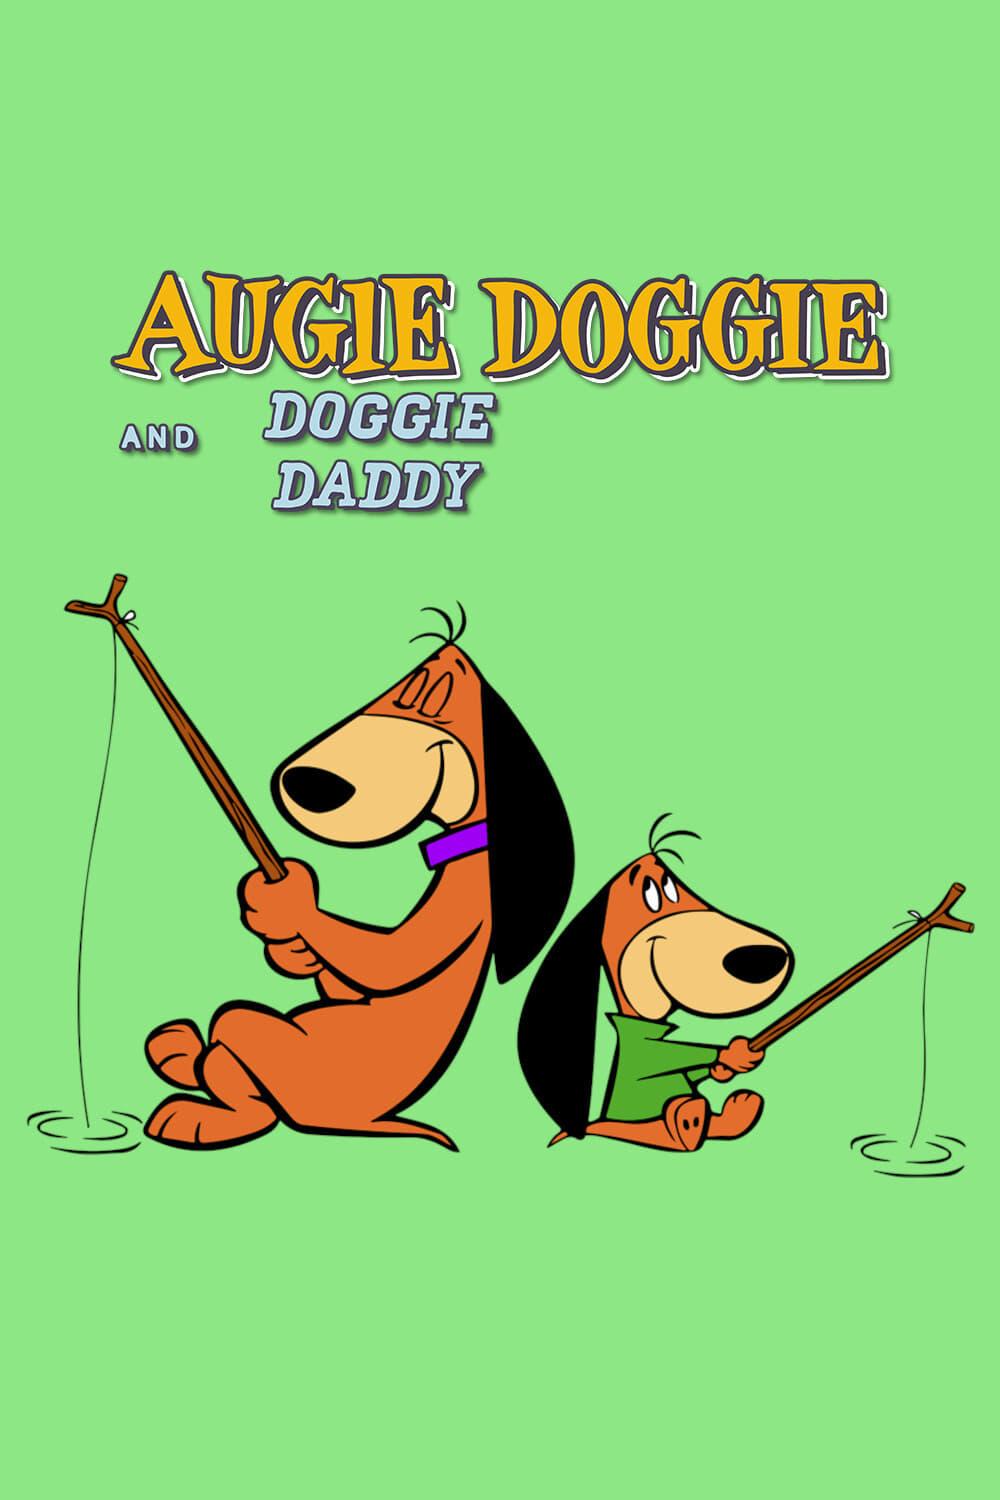 Augie Doggie and Doggie Daddy poster